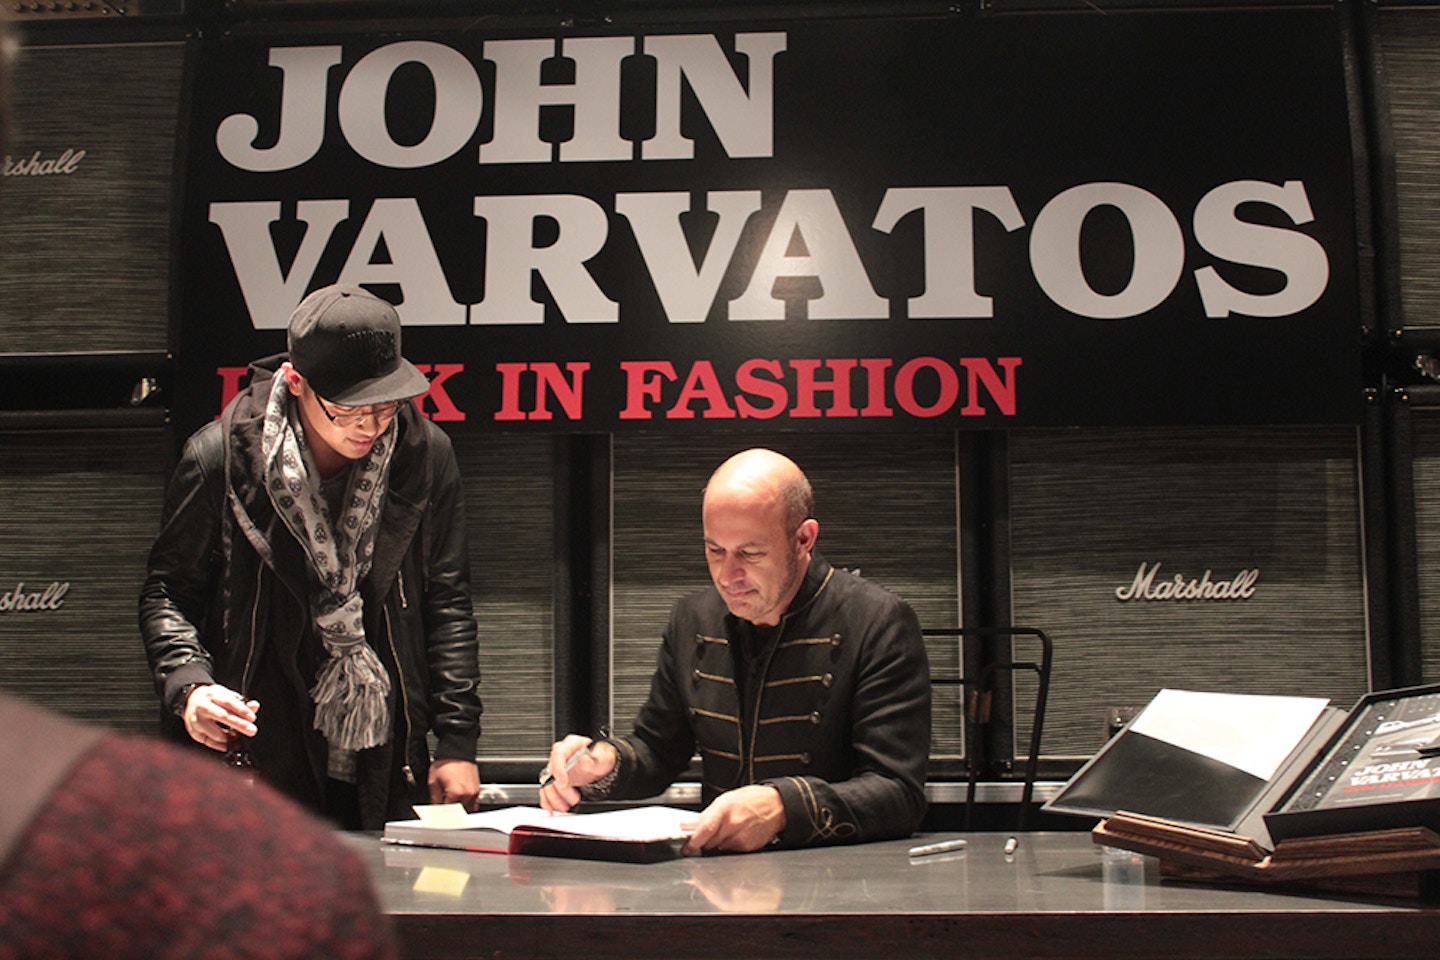 John Varvatos Rock In Fashion book signing and Yorkdale store opening